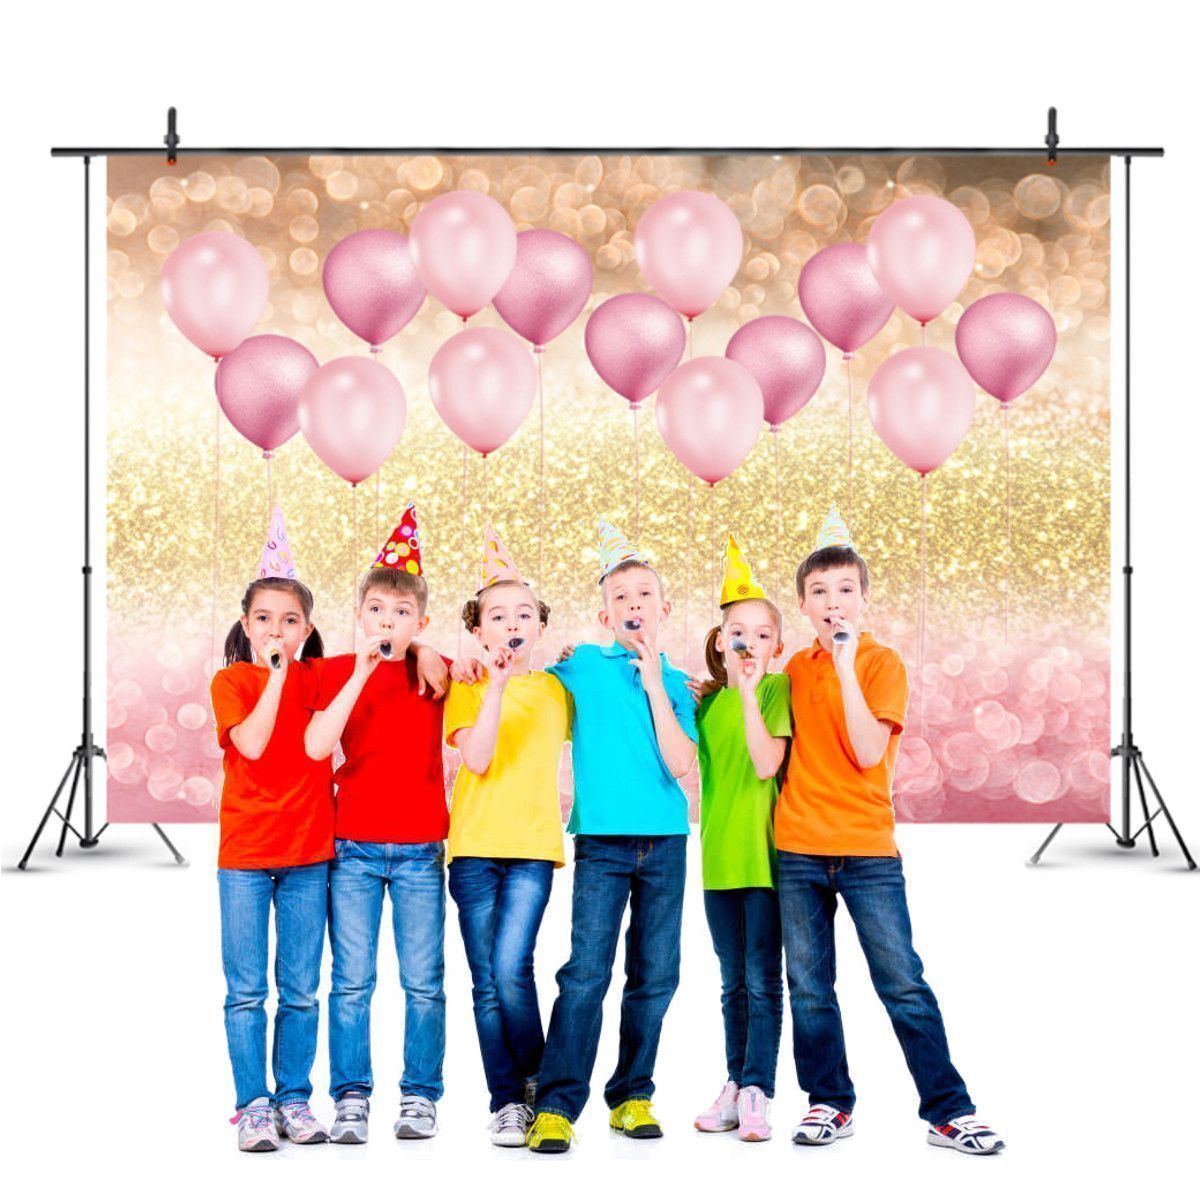 Little-Baby-Birthday-Party-Theme-Backdrops-Photography-Photo-Booth-Studio-Background-Party-Home-Deco-1748939